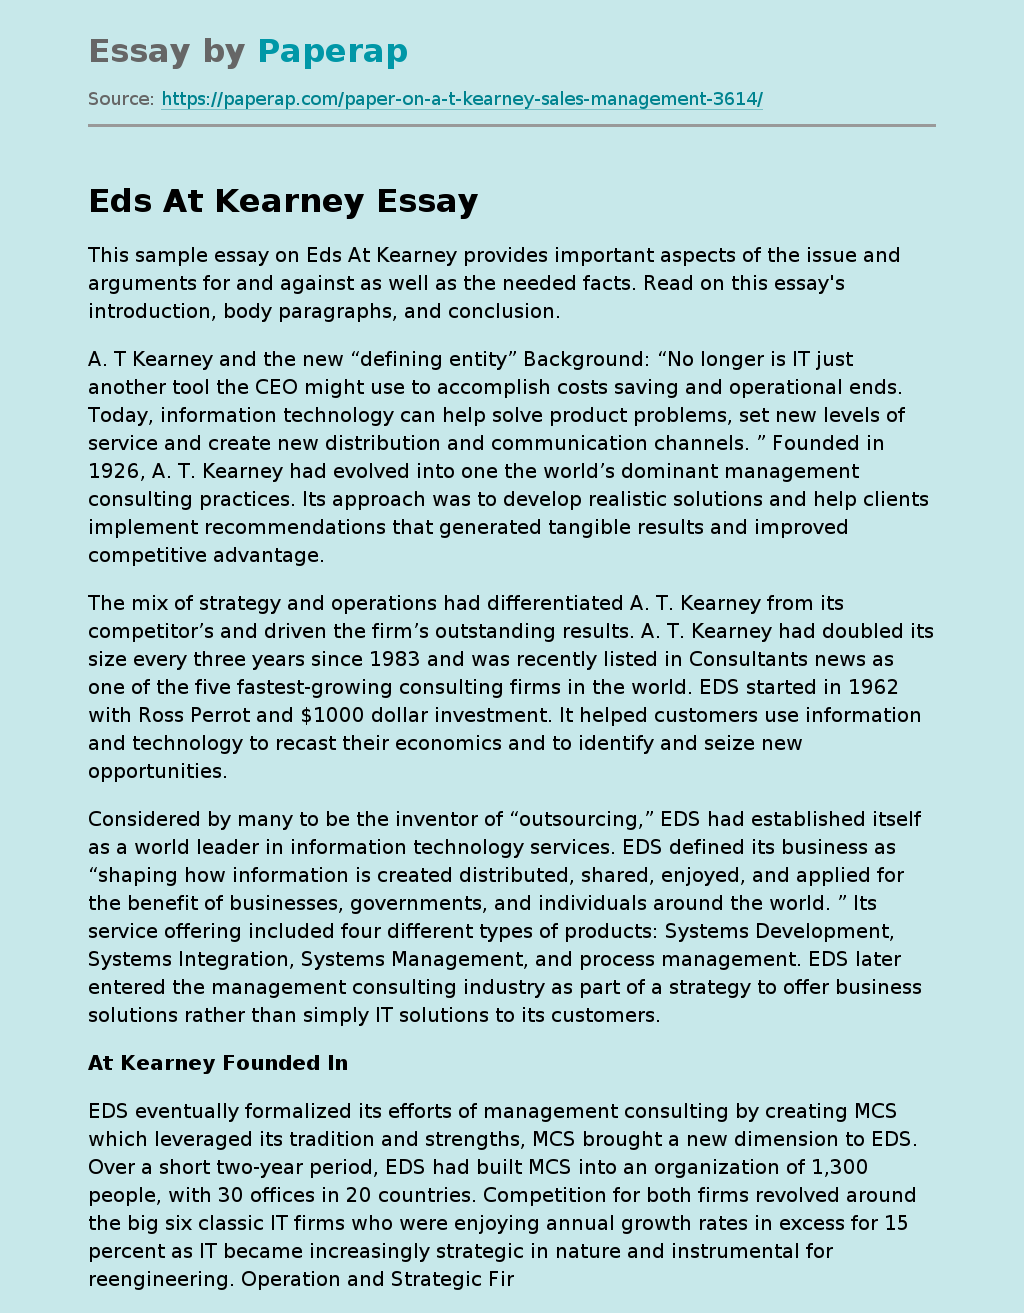 Kearney Is a Global Consulting Company